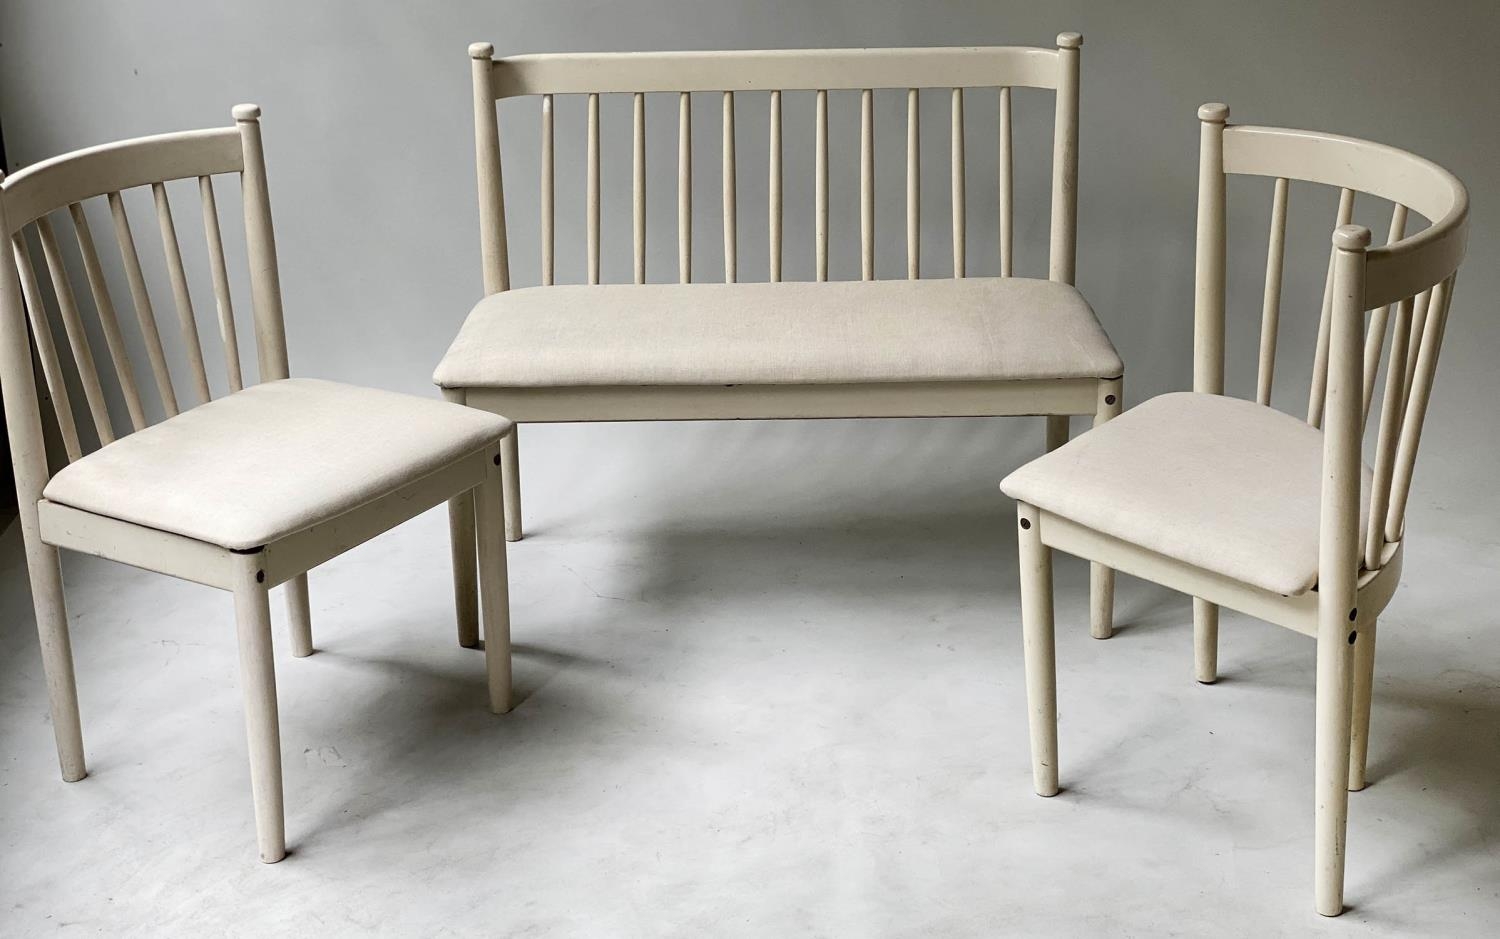 SCANDINAVIAN BENCH, mid 20th century grey painted with ecru linen upholstered seat, together with